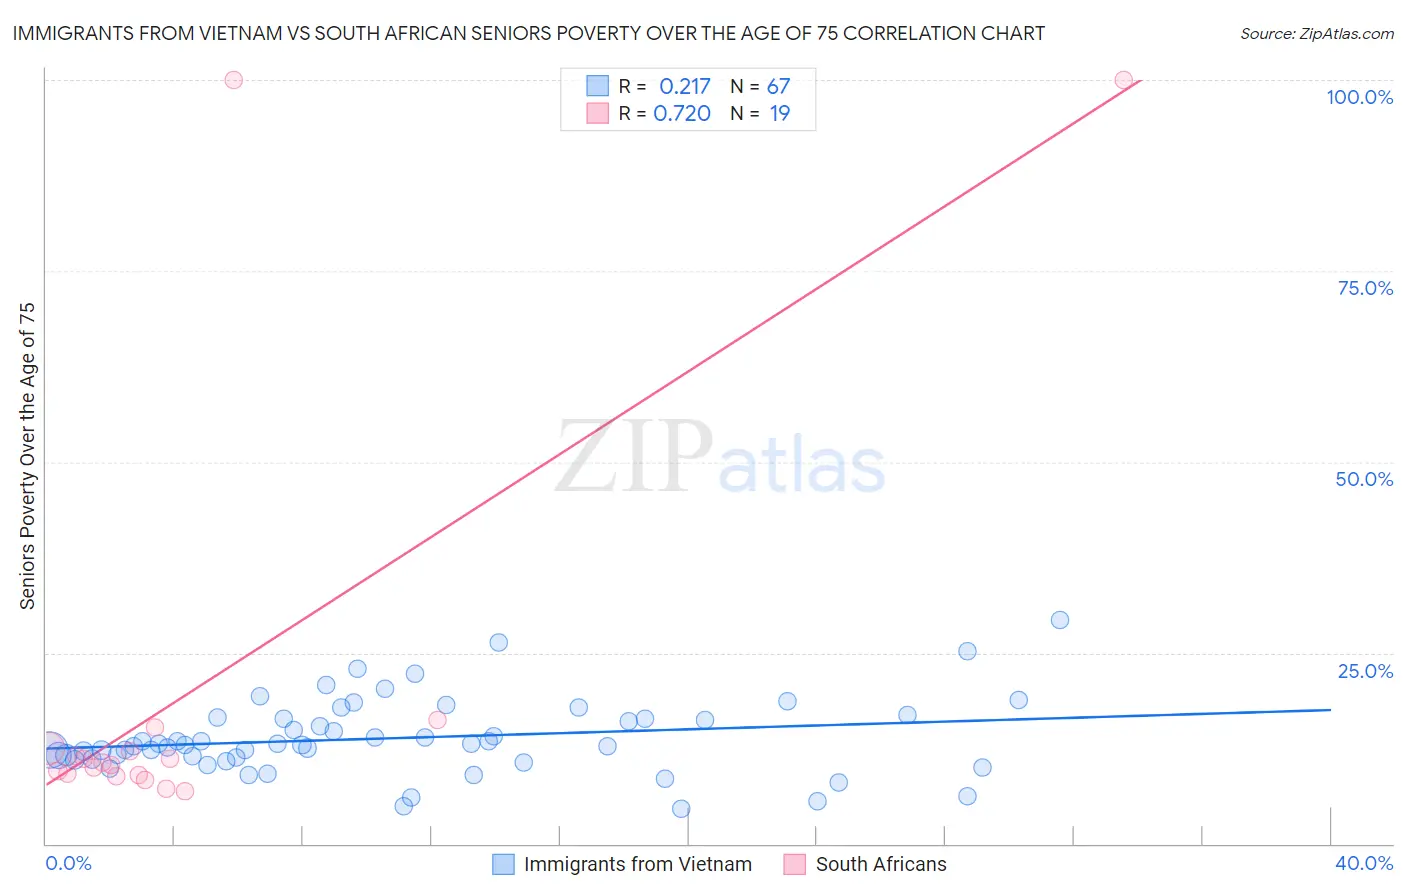 Immigrants from Vietnam vs South African Seniors Poverty Over the Age of 75